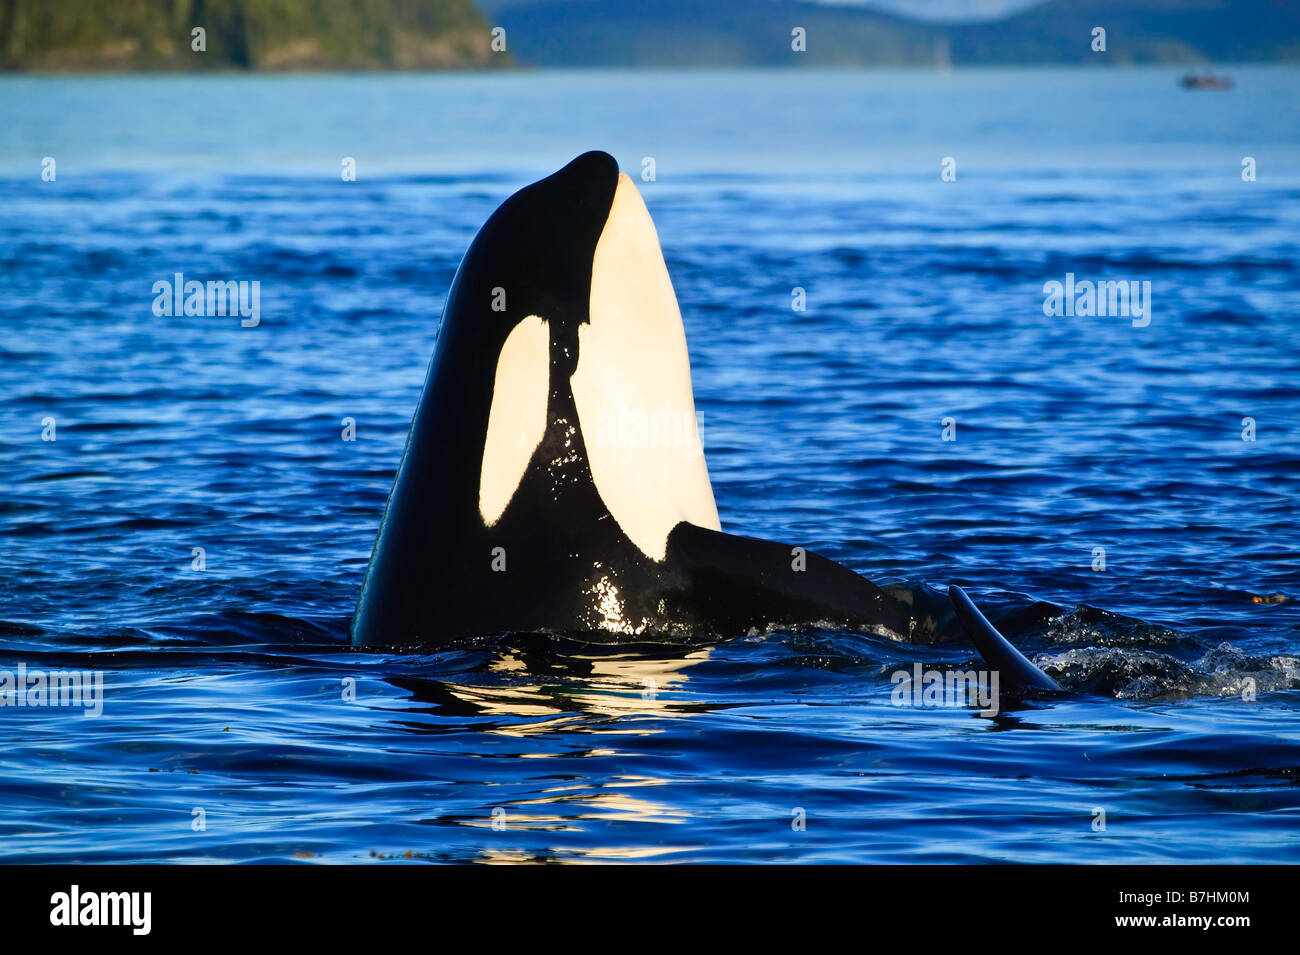 A large Orca Killer whale is spy hopping in the blue pacific ocean. Stock Photo